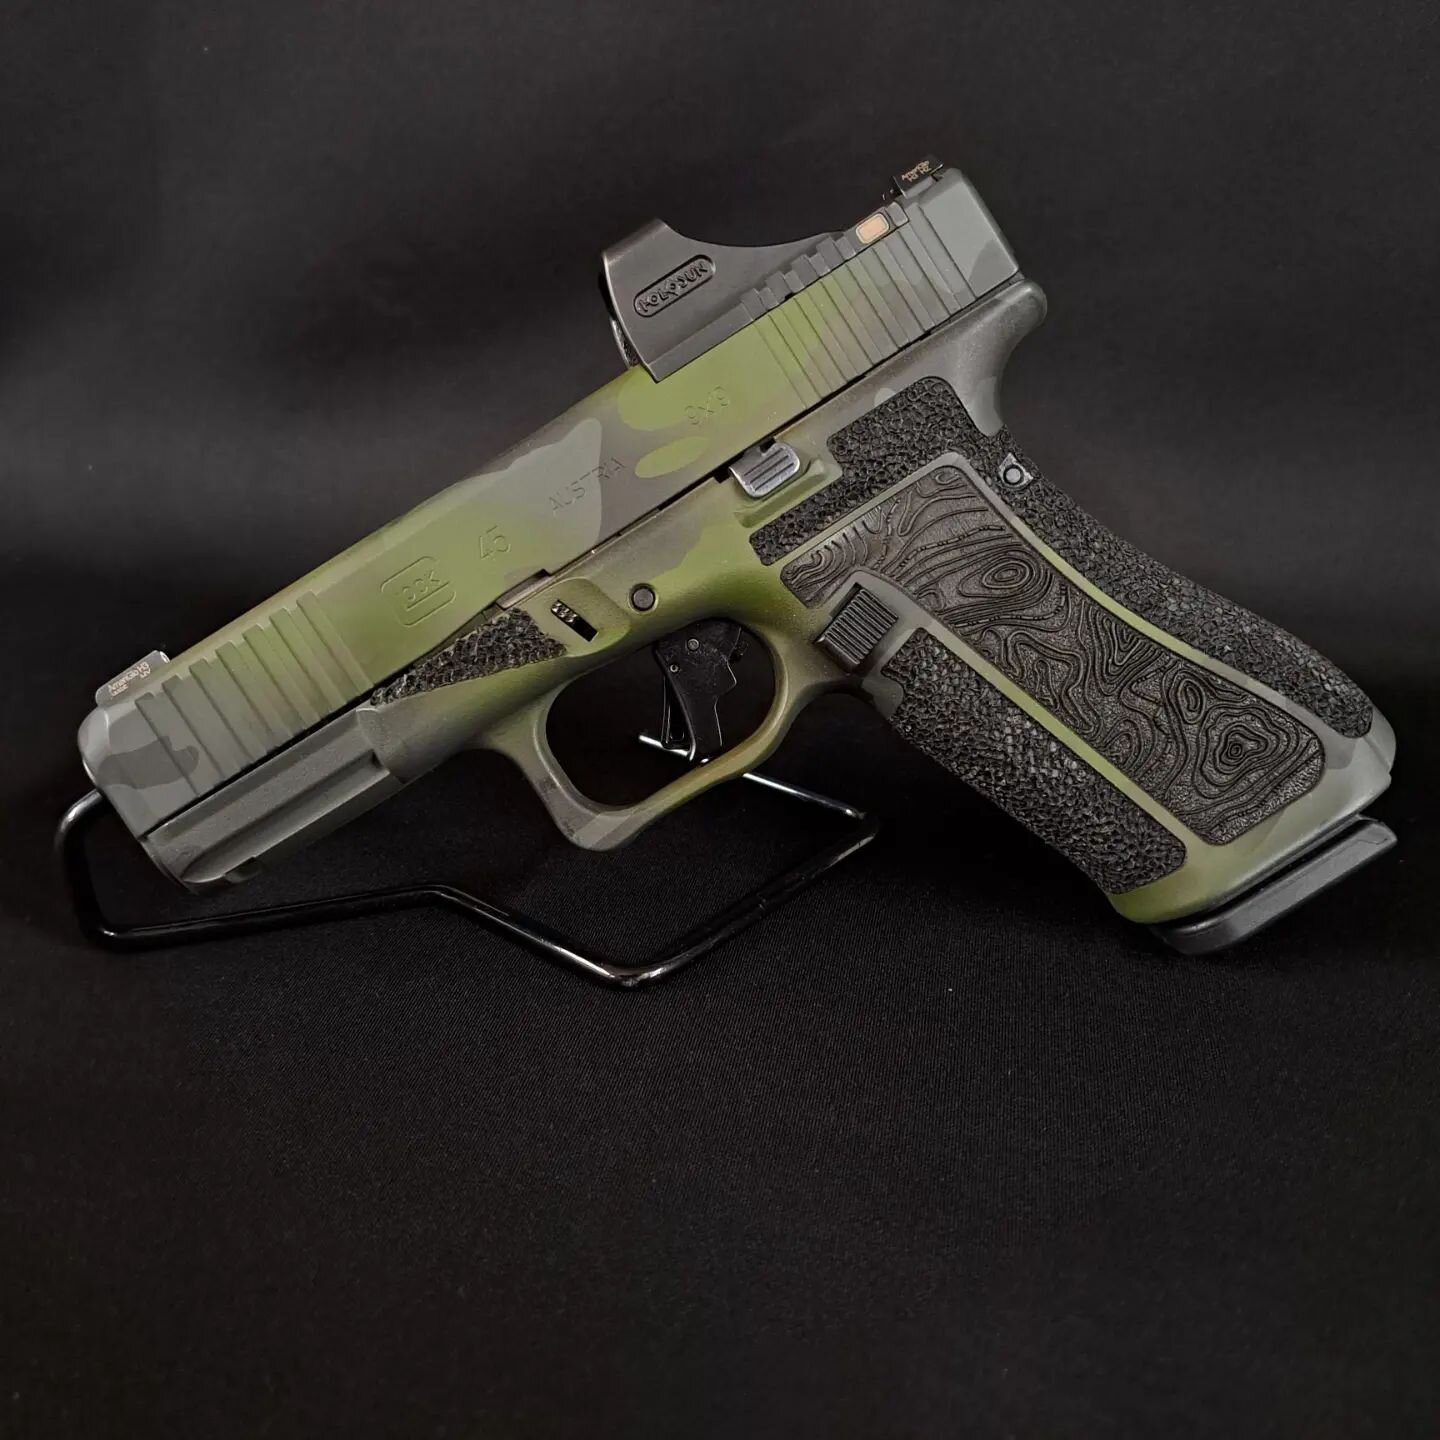 After applying our custom Jungle Camo Cerakote, we combined laser engraving with hand-stippling on this Glock 45 to create something functional and pleasing to the eye. To top it off, the Apex trigger kit paired with some stoning and polishing brough